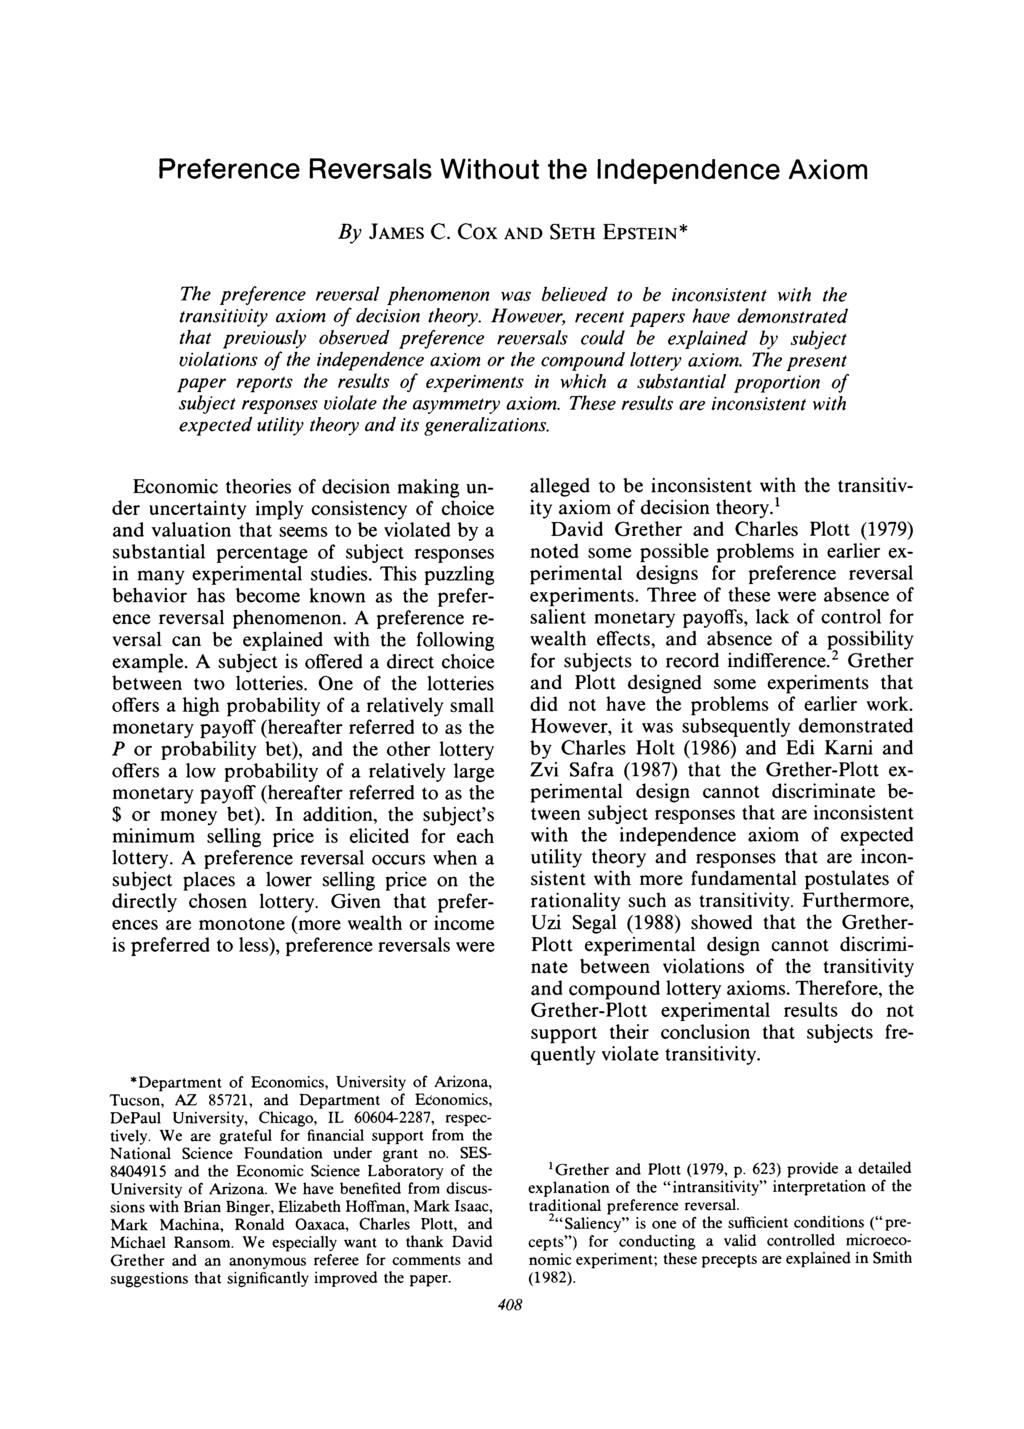 Preference Reversals Without the Independence Axiom By JAMES C. COX AND SETH EPSTEIN* The preference reversal phenomenon was believed to be inconsistent with the transitivity axiom of decision theory.